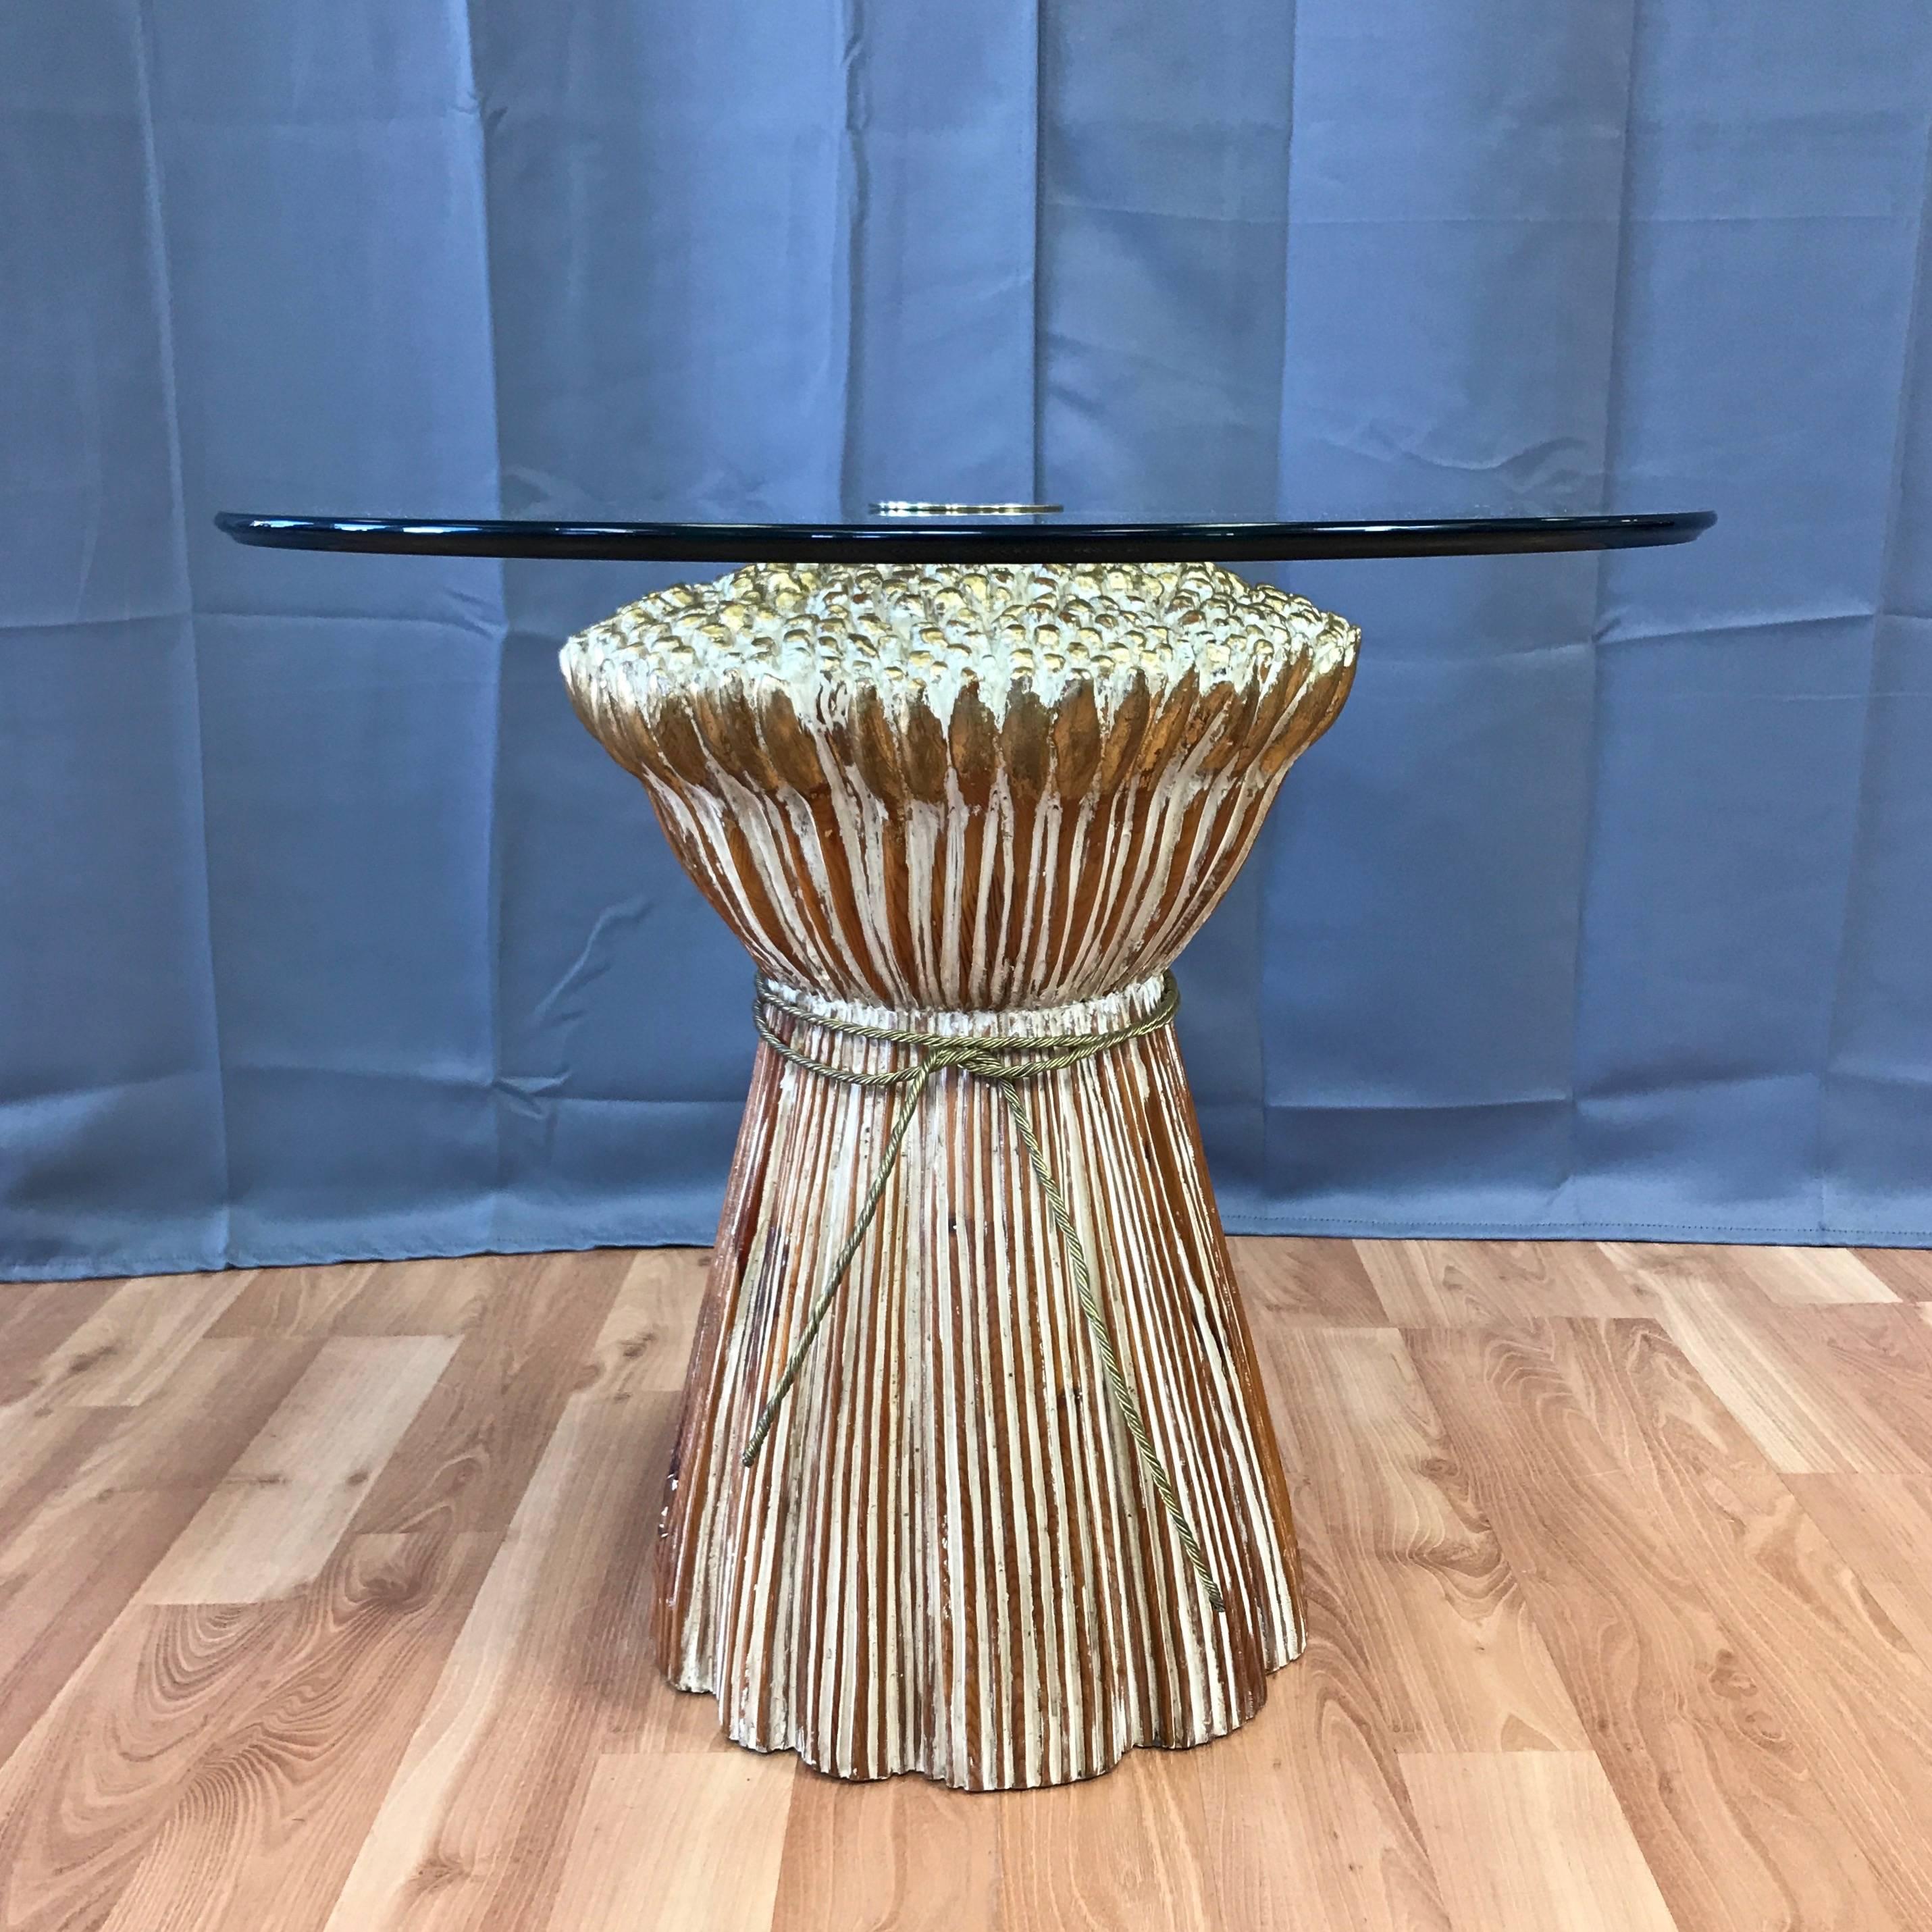 A superb solid wood sheaf of wheat cocktail table with glass top and brass accents.

Beautifully carved base is enhanced by off-white lacquer fills and gleaming gilt accents. A brass finish metal “rope” is tied around its waist. Floating glass top